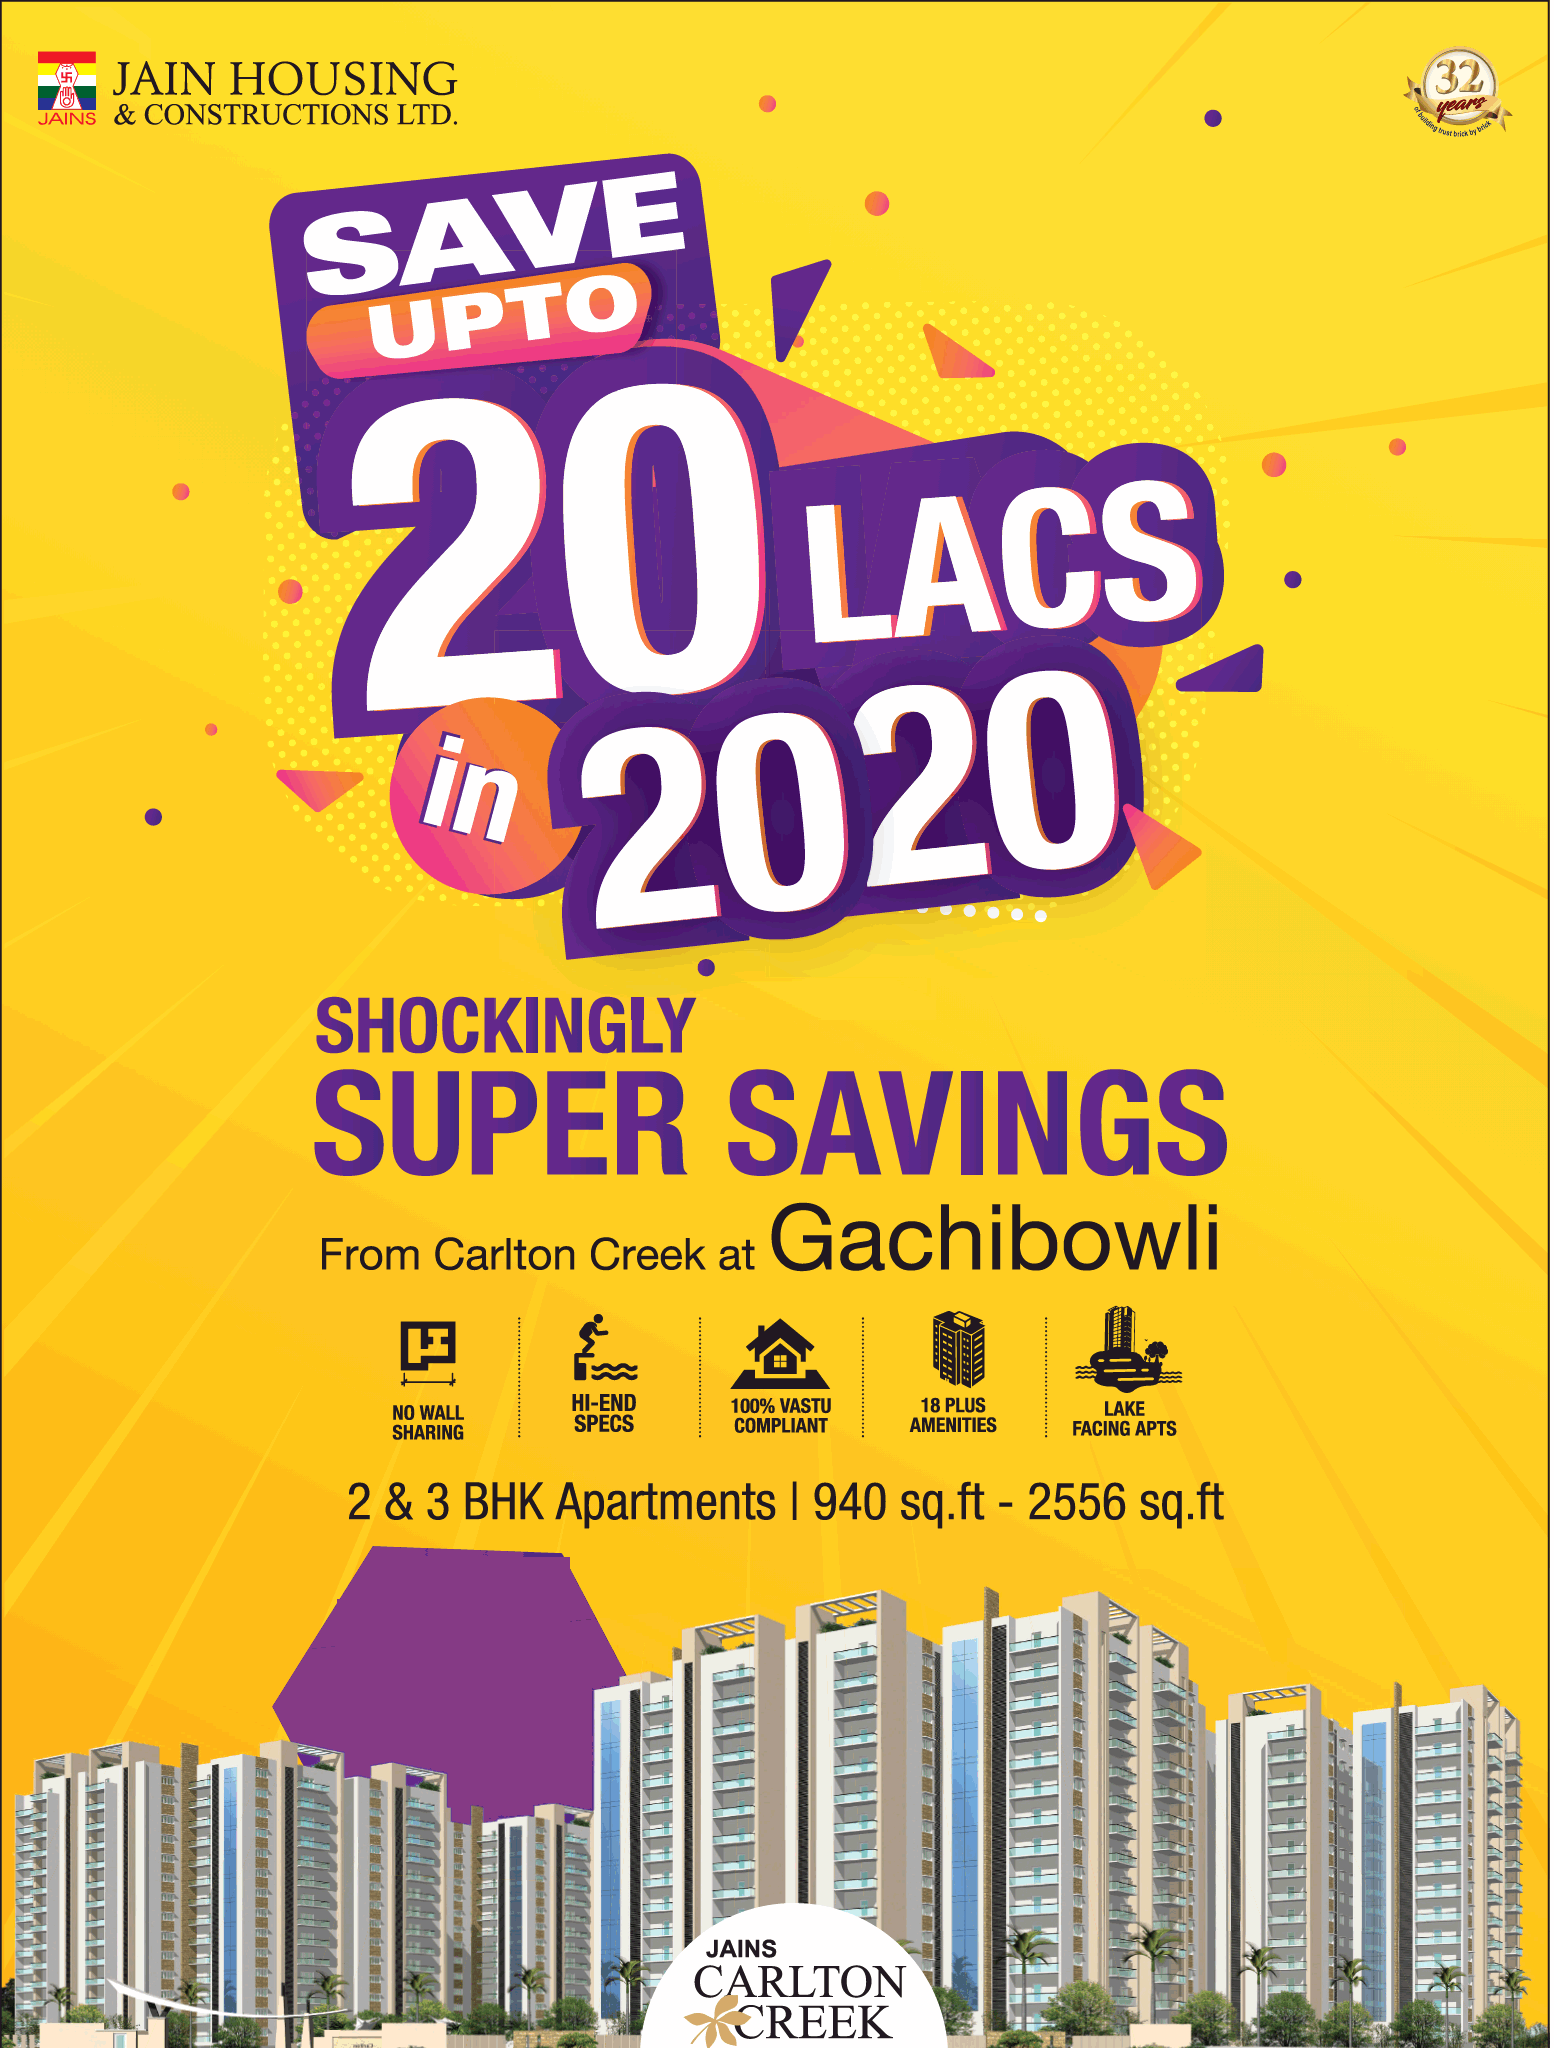 Save up to 20 lakh in 2020 at Jains Carlton Creek in Hyderabad Update